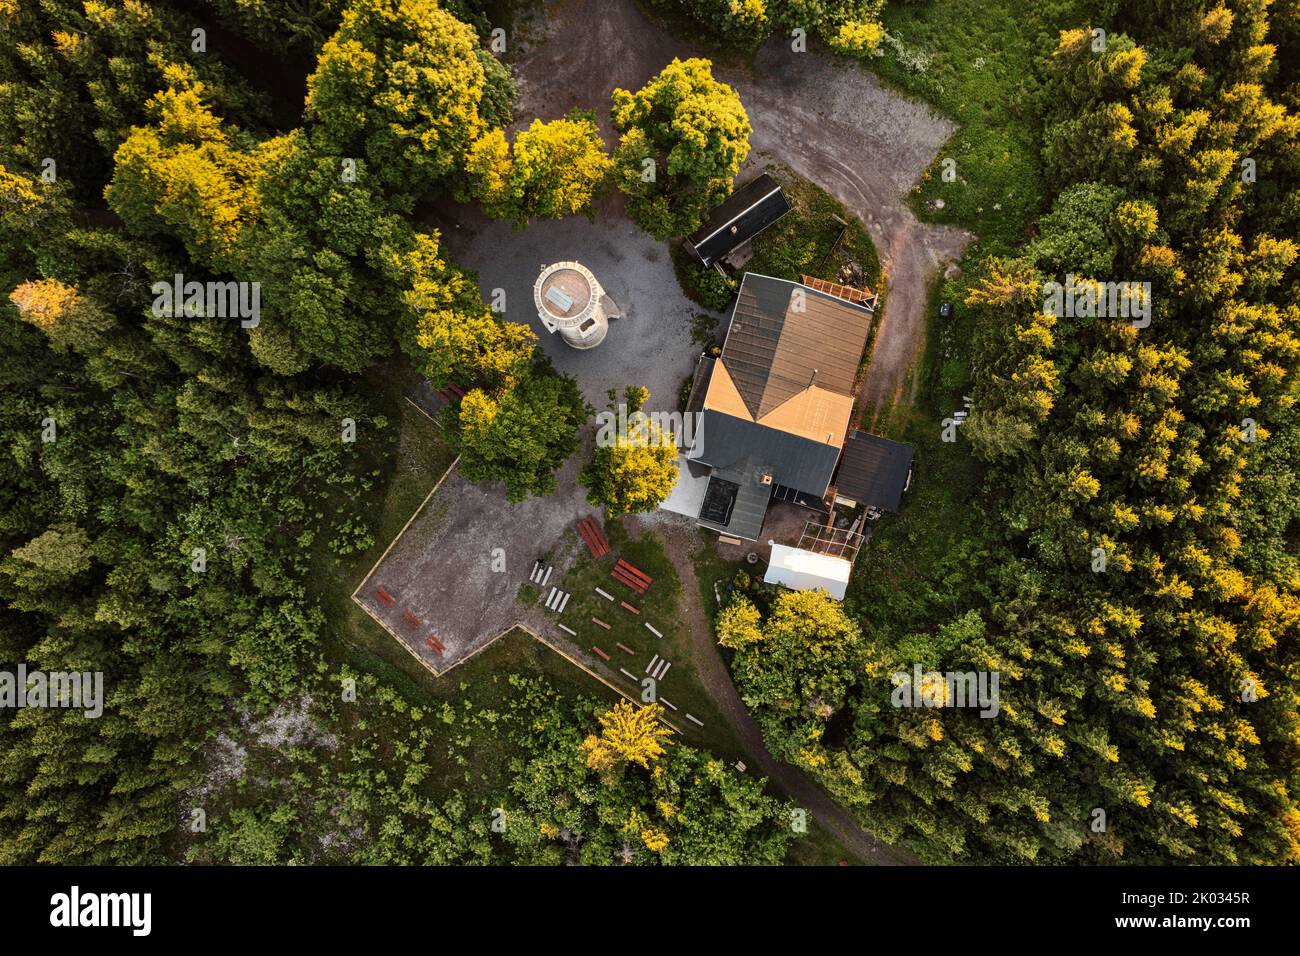 Germany, Thuringia, Ilmenau, Kickelhahn, lookout tower, inn, resting place, forest, top view, aerial photo Stock Photo